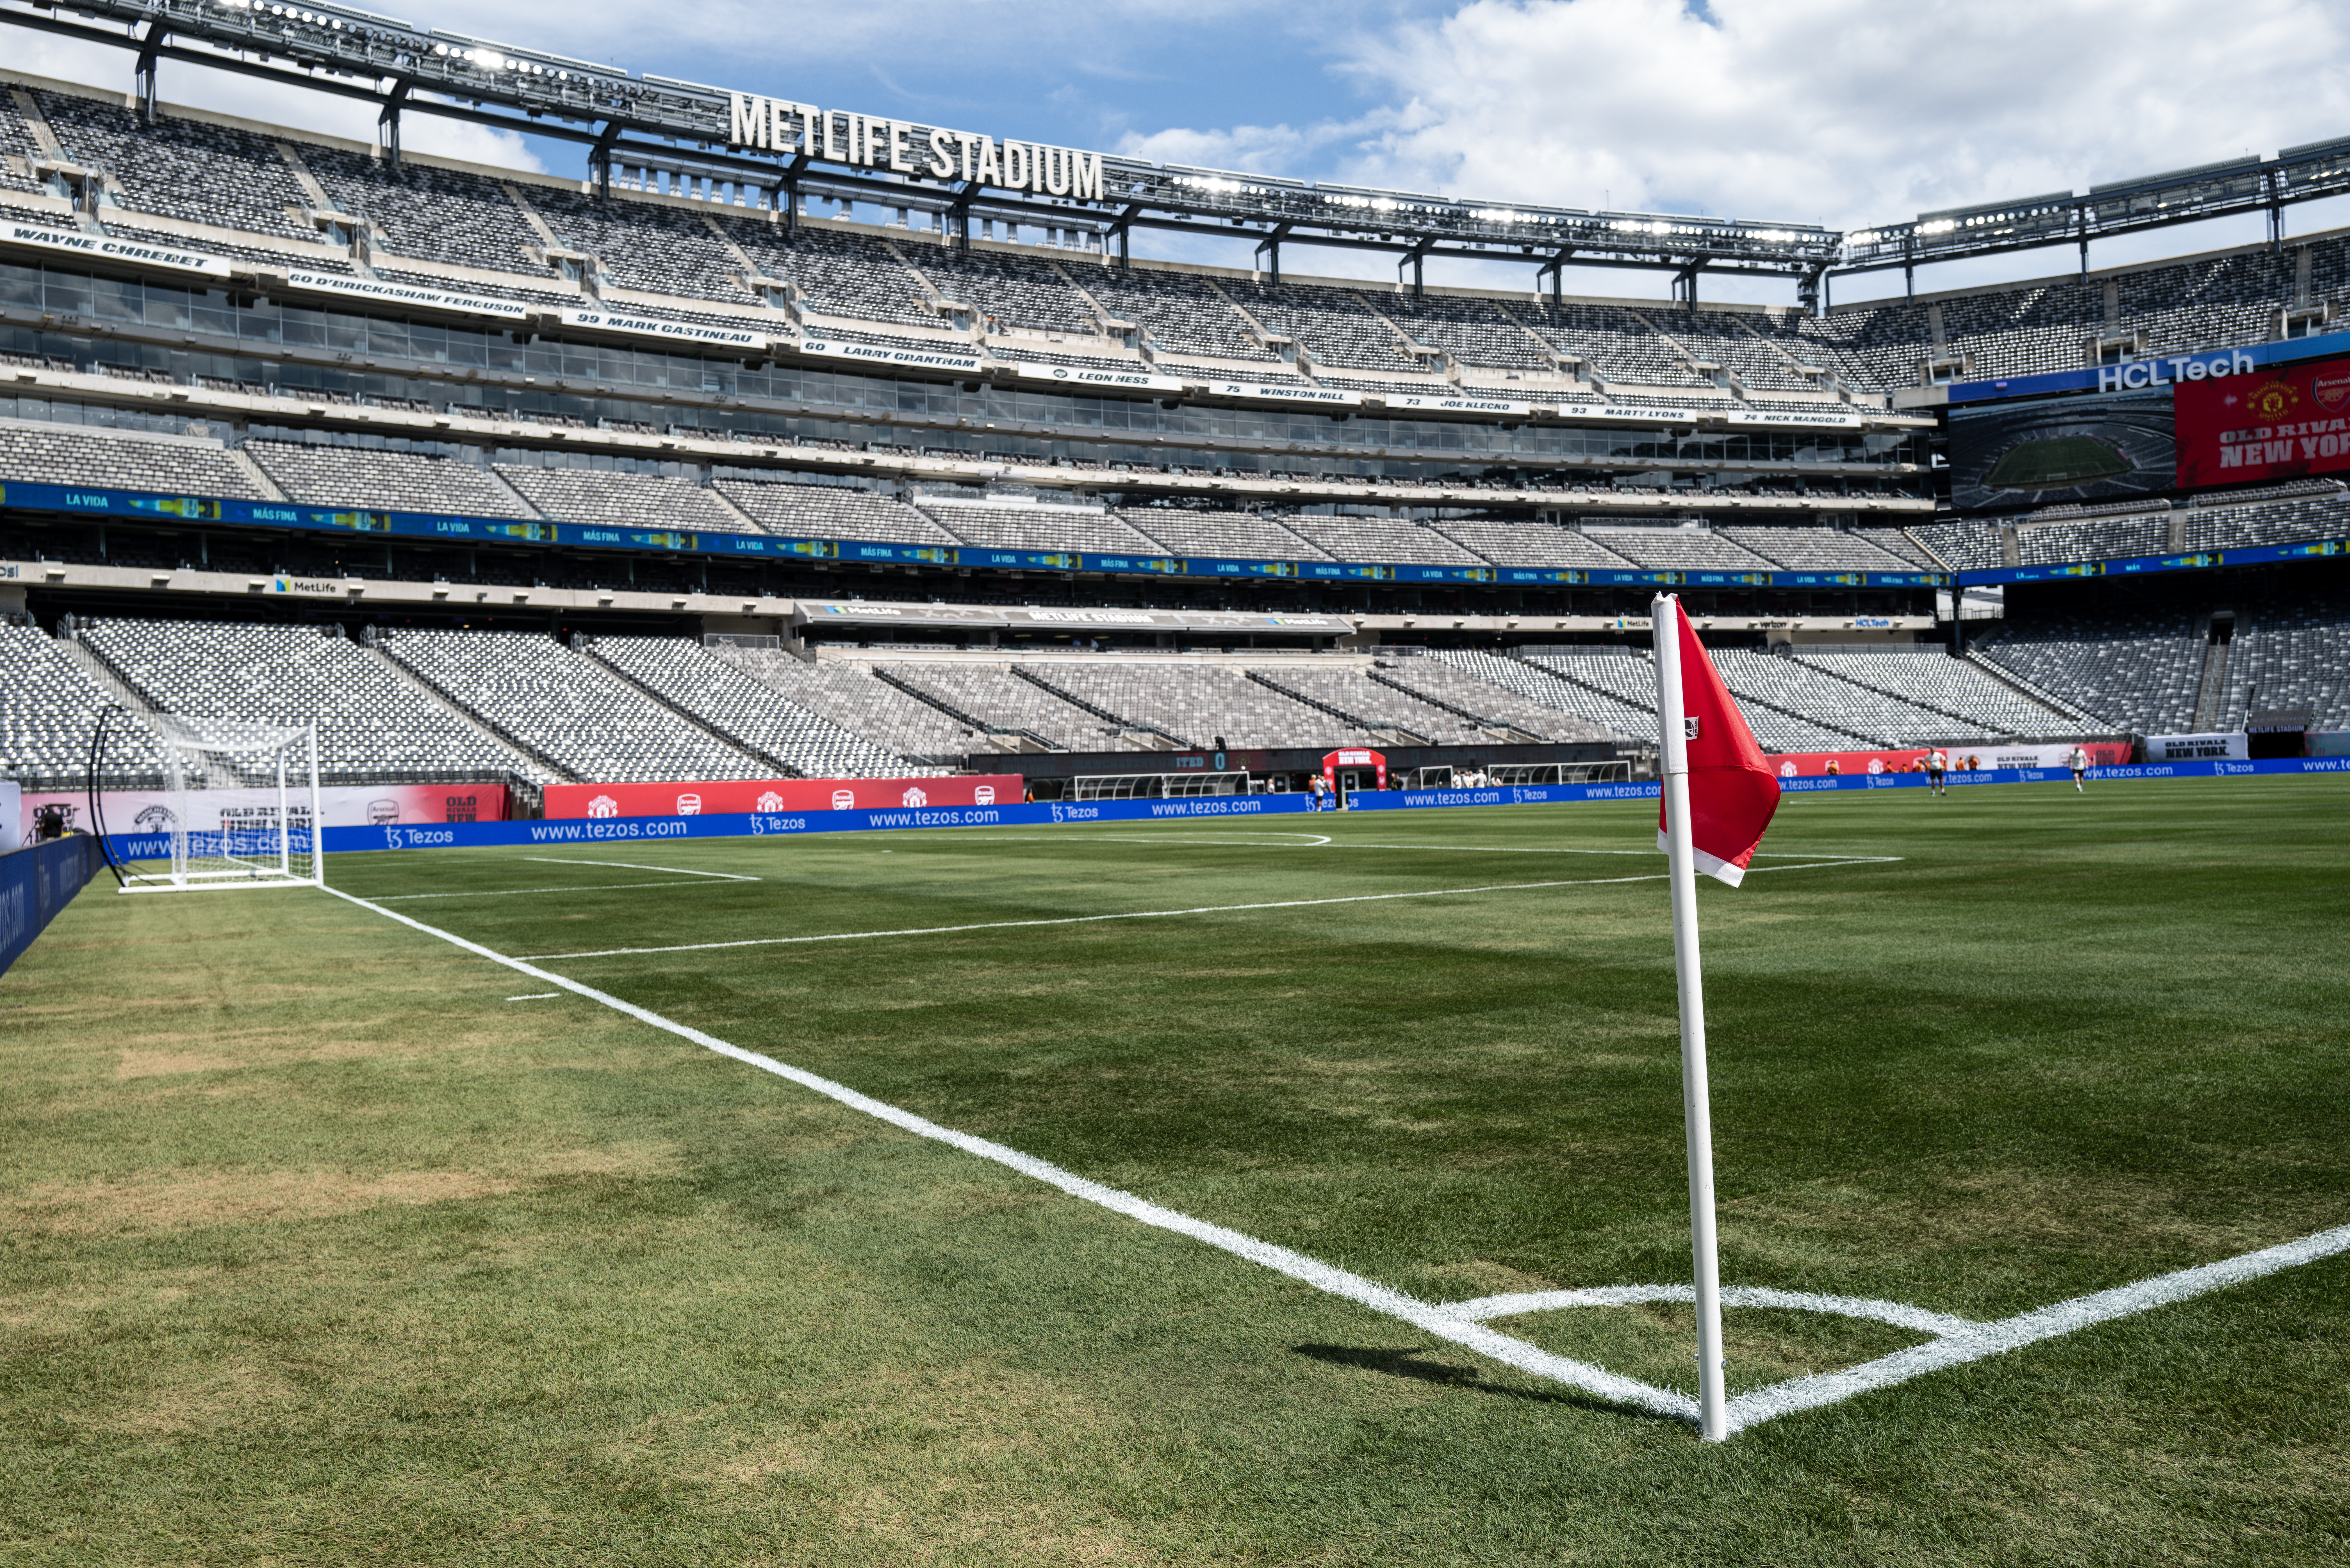 A general view of the MetLife Stadium the home of NFL teams the New York Giants and Jets ahead of the USA summer friendly game between Arsenal and Manchester United at MetLife Stadium on July 22, 2023.